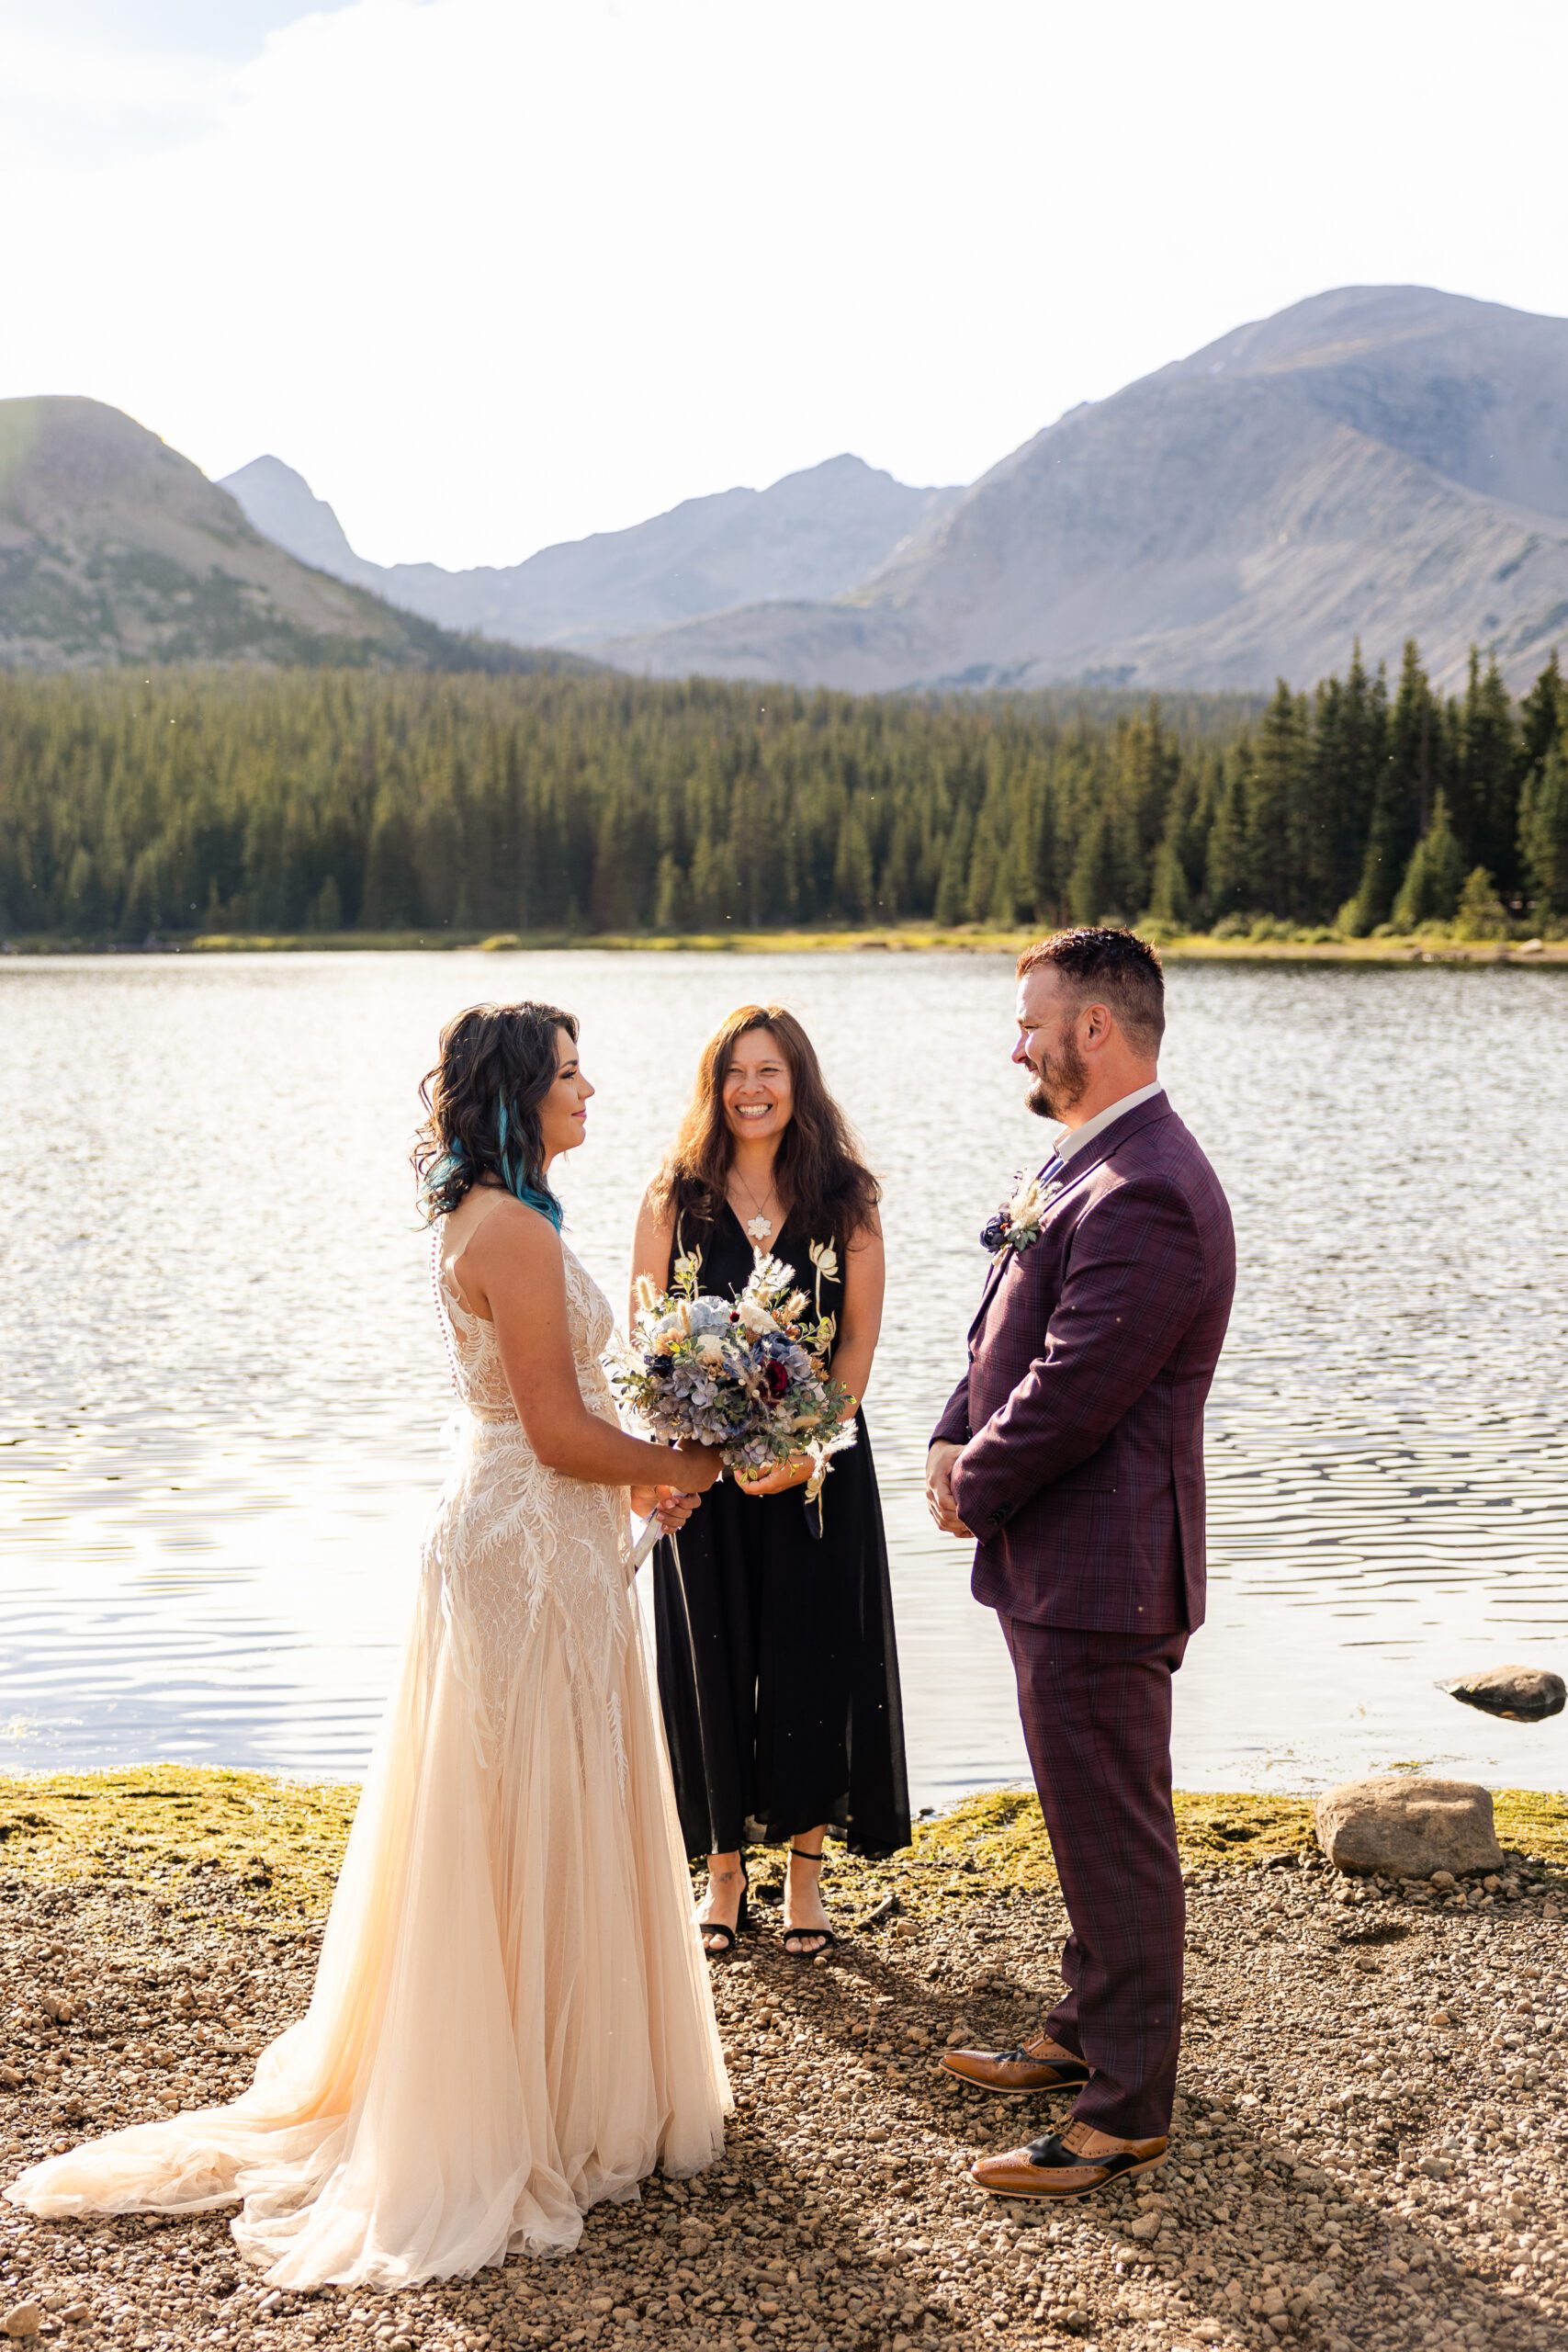 The beginning of their Brainard Lake Elopement near the lake. The Bride and groom smiling at eachother. 